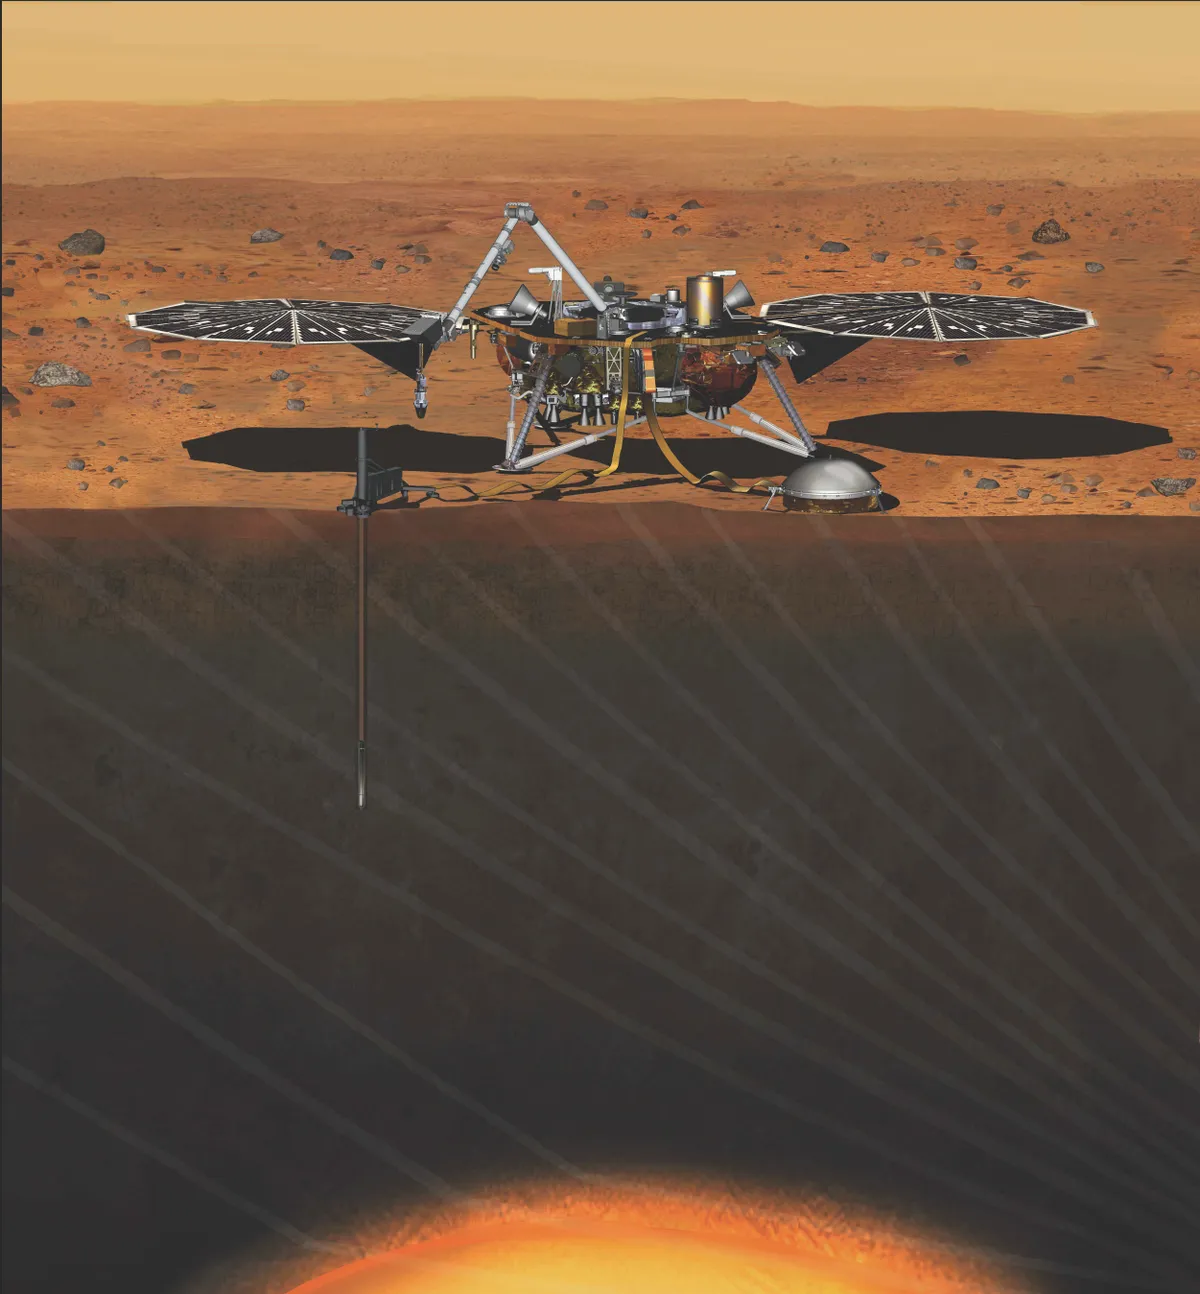 NASA's Mars InSight lander is due to arrive at the Red Planet later this year, and should tell us even more about the planet's interior © NASA